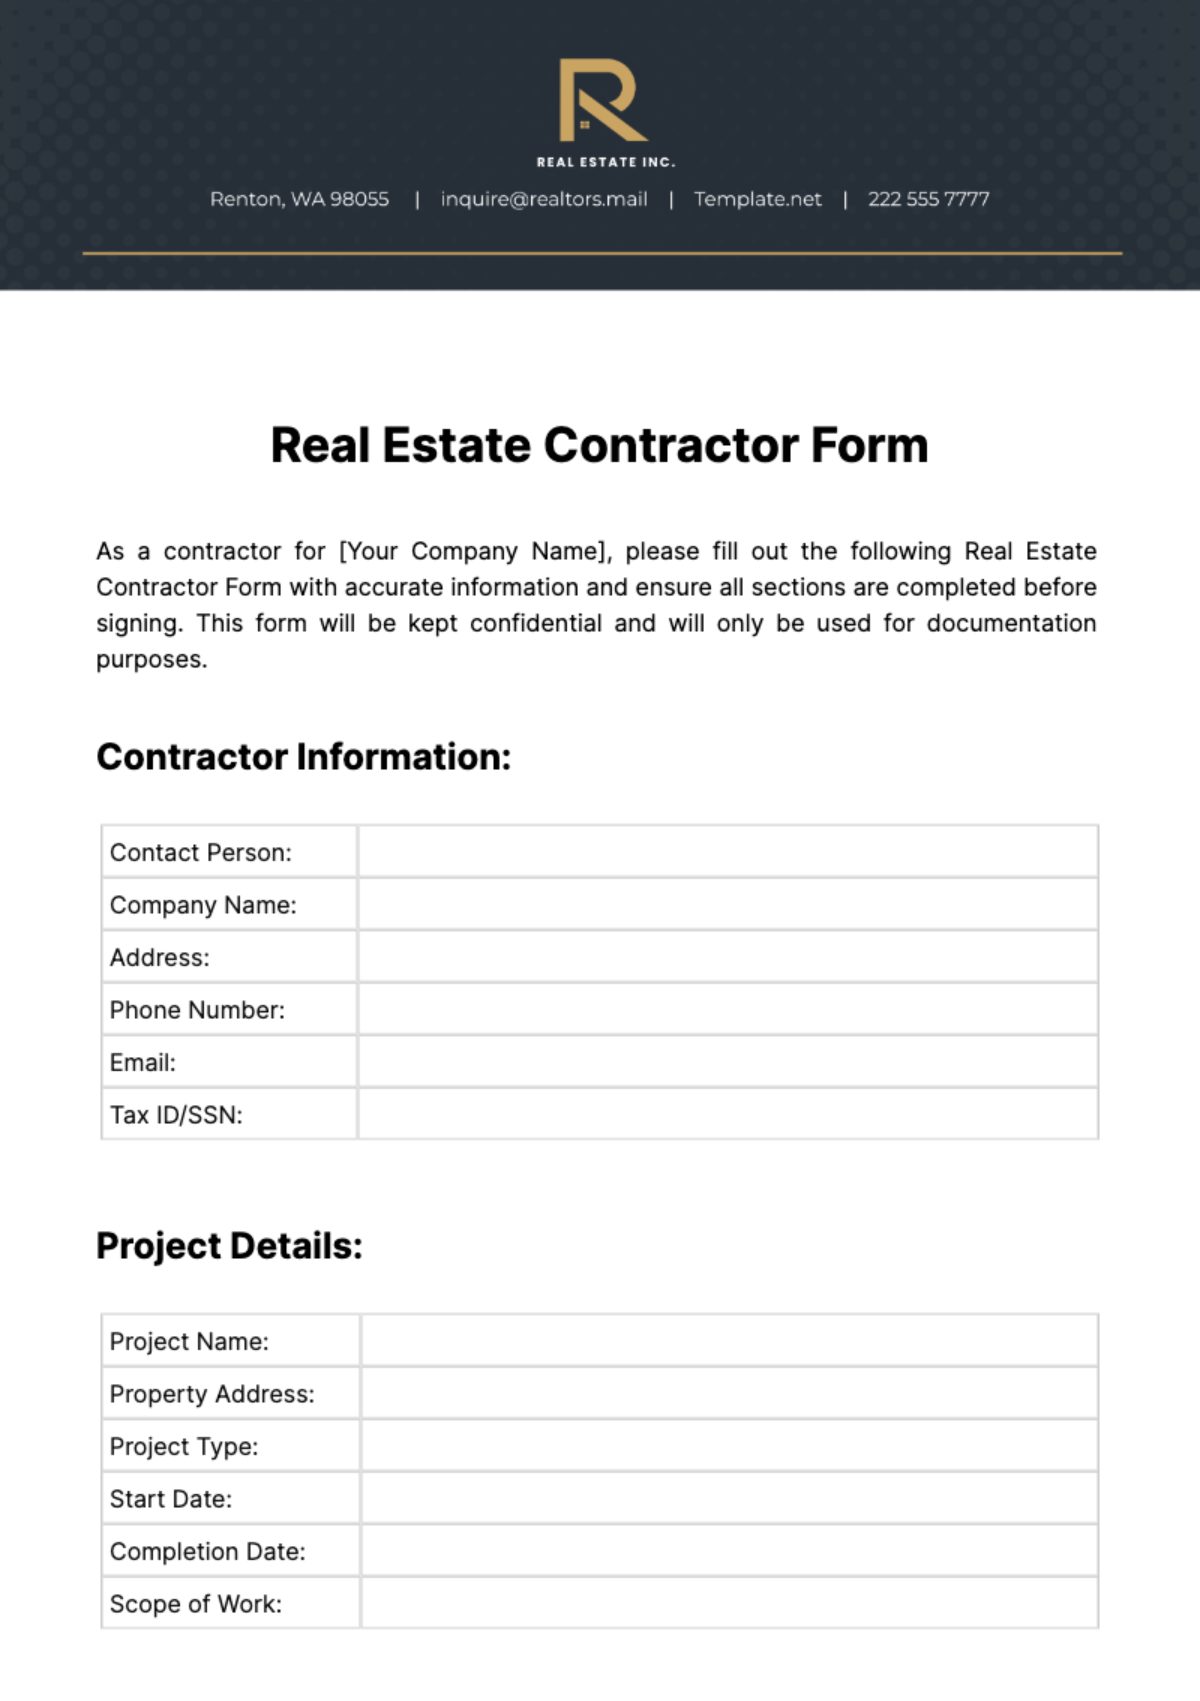 Real Estate Contractor Form Template